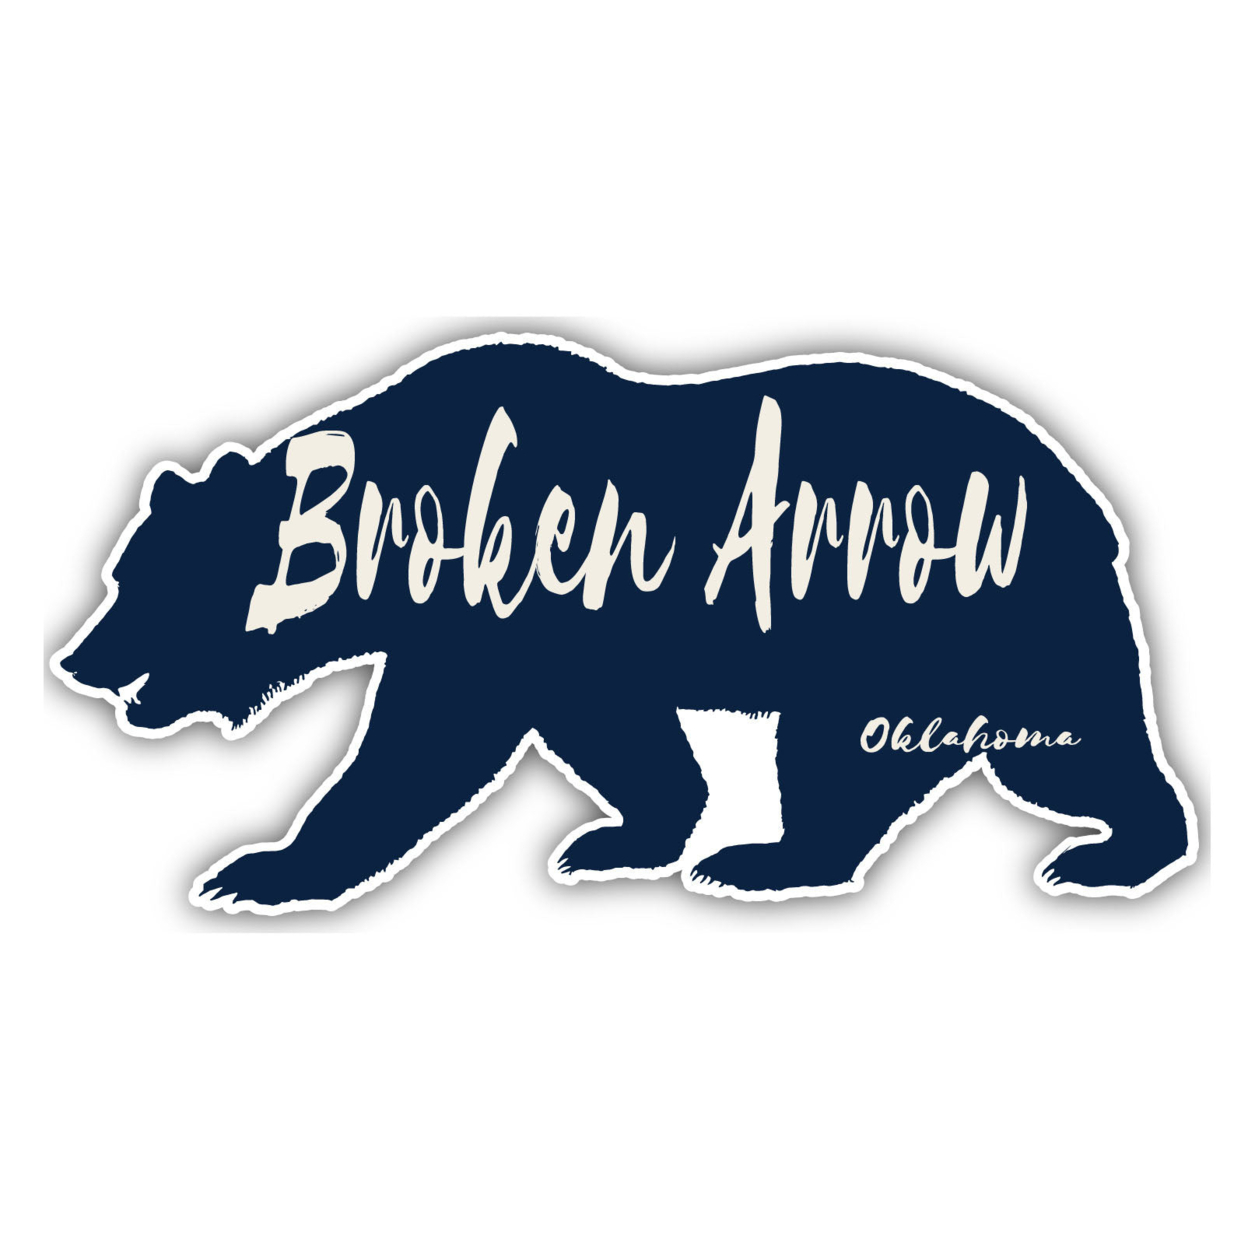 Broken Arrow Oklahoma Souvenir Decorative Stickers (Choose Theme And Size) - 4-Pack, 4-Inch, Great Outdoors